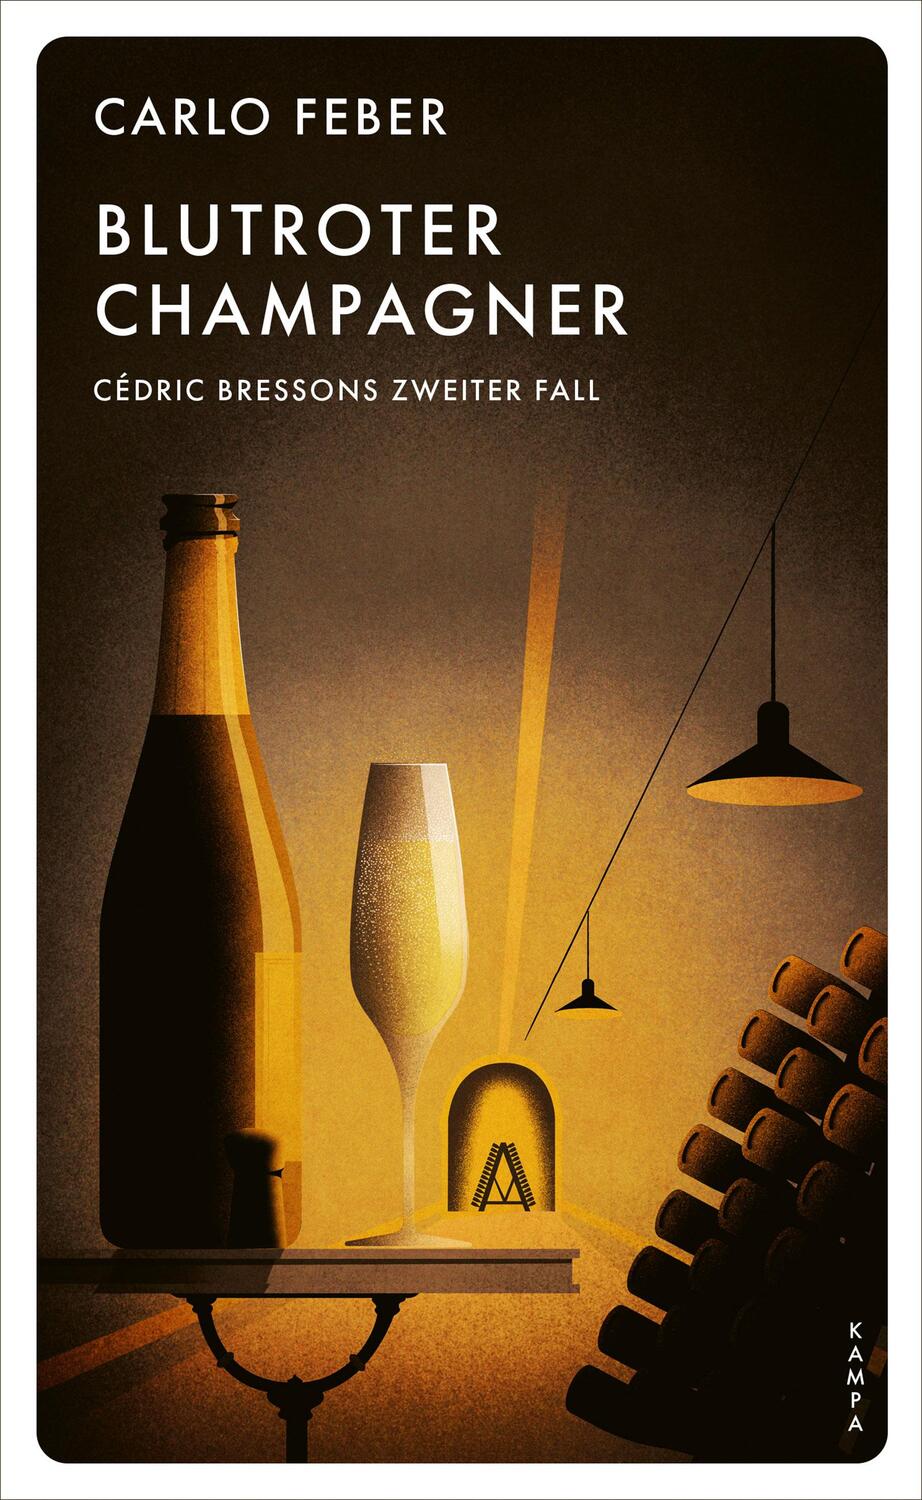 Cover: 9783311125716 | Blutroter Champagner | Cédric Bressons zweiter Fall | Carlo Feber